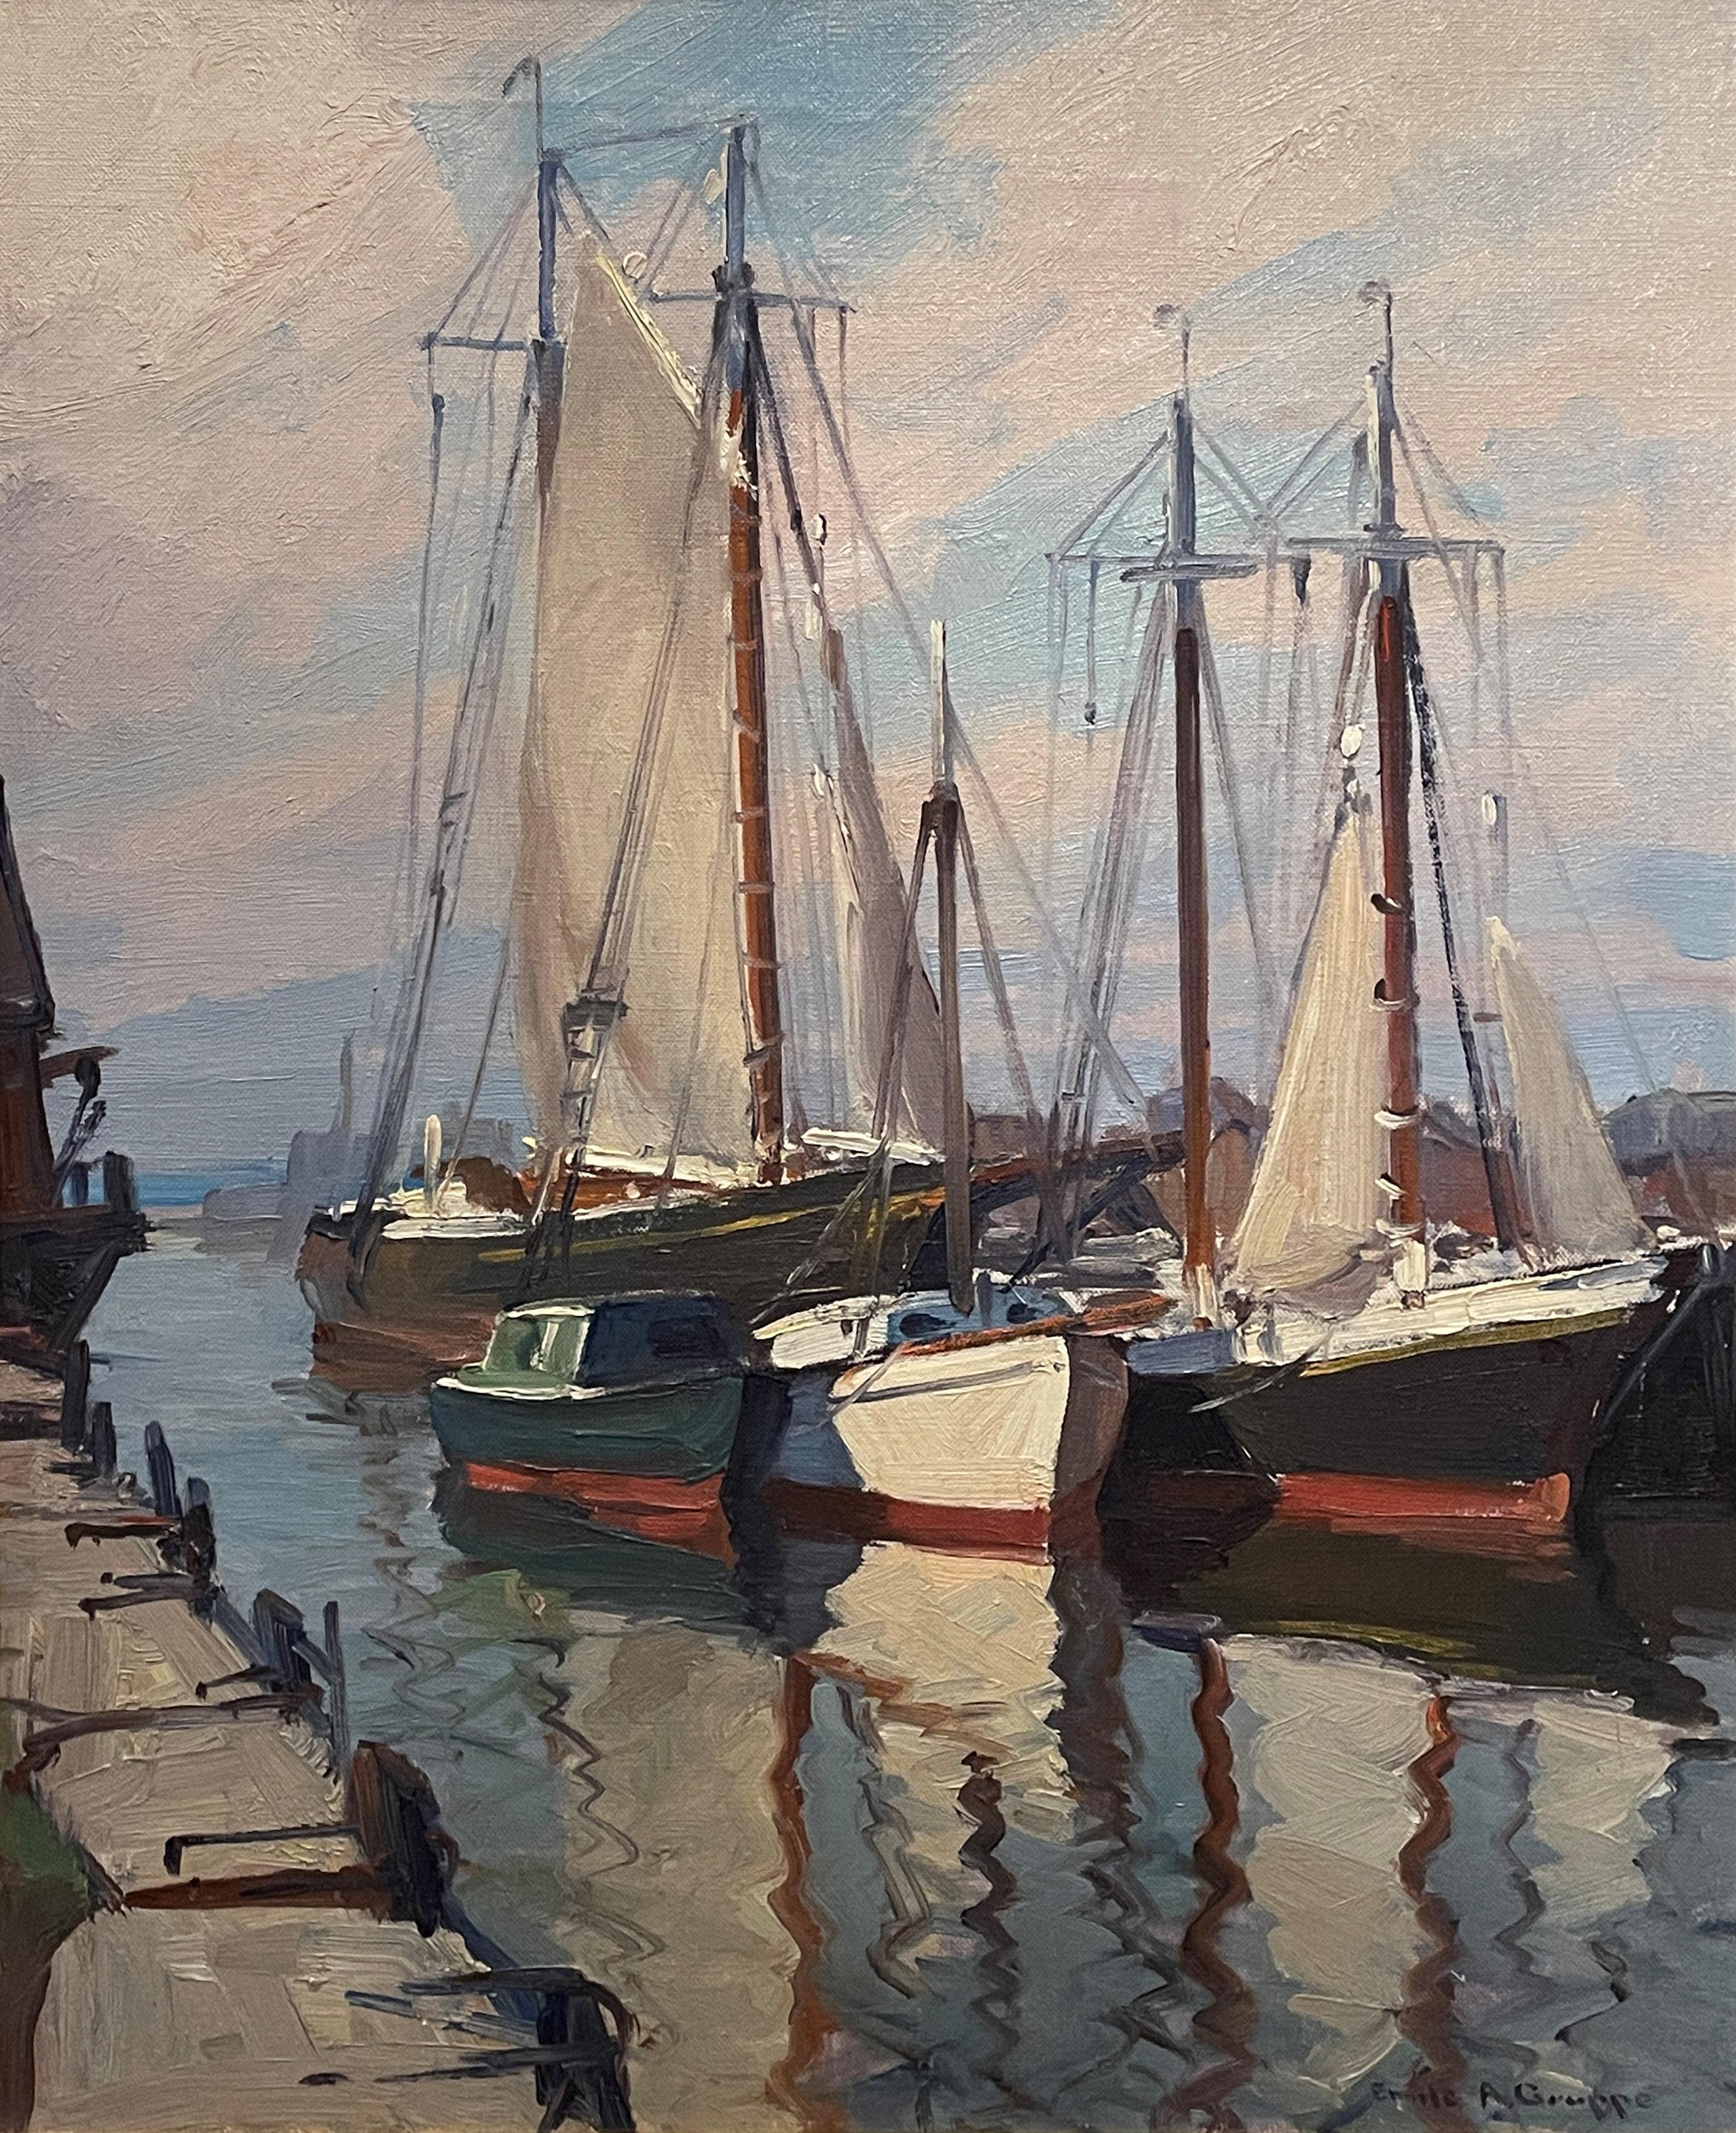 Emile Gruppe
Drying the Sails
Signed lower right
Oil on canvas
24 x 20 inches

Emile Gruppe was an unusually prolific artist. He was at his easel almost every day and created thousands of paintings over a career that lasted 60 years. At his peak, he